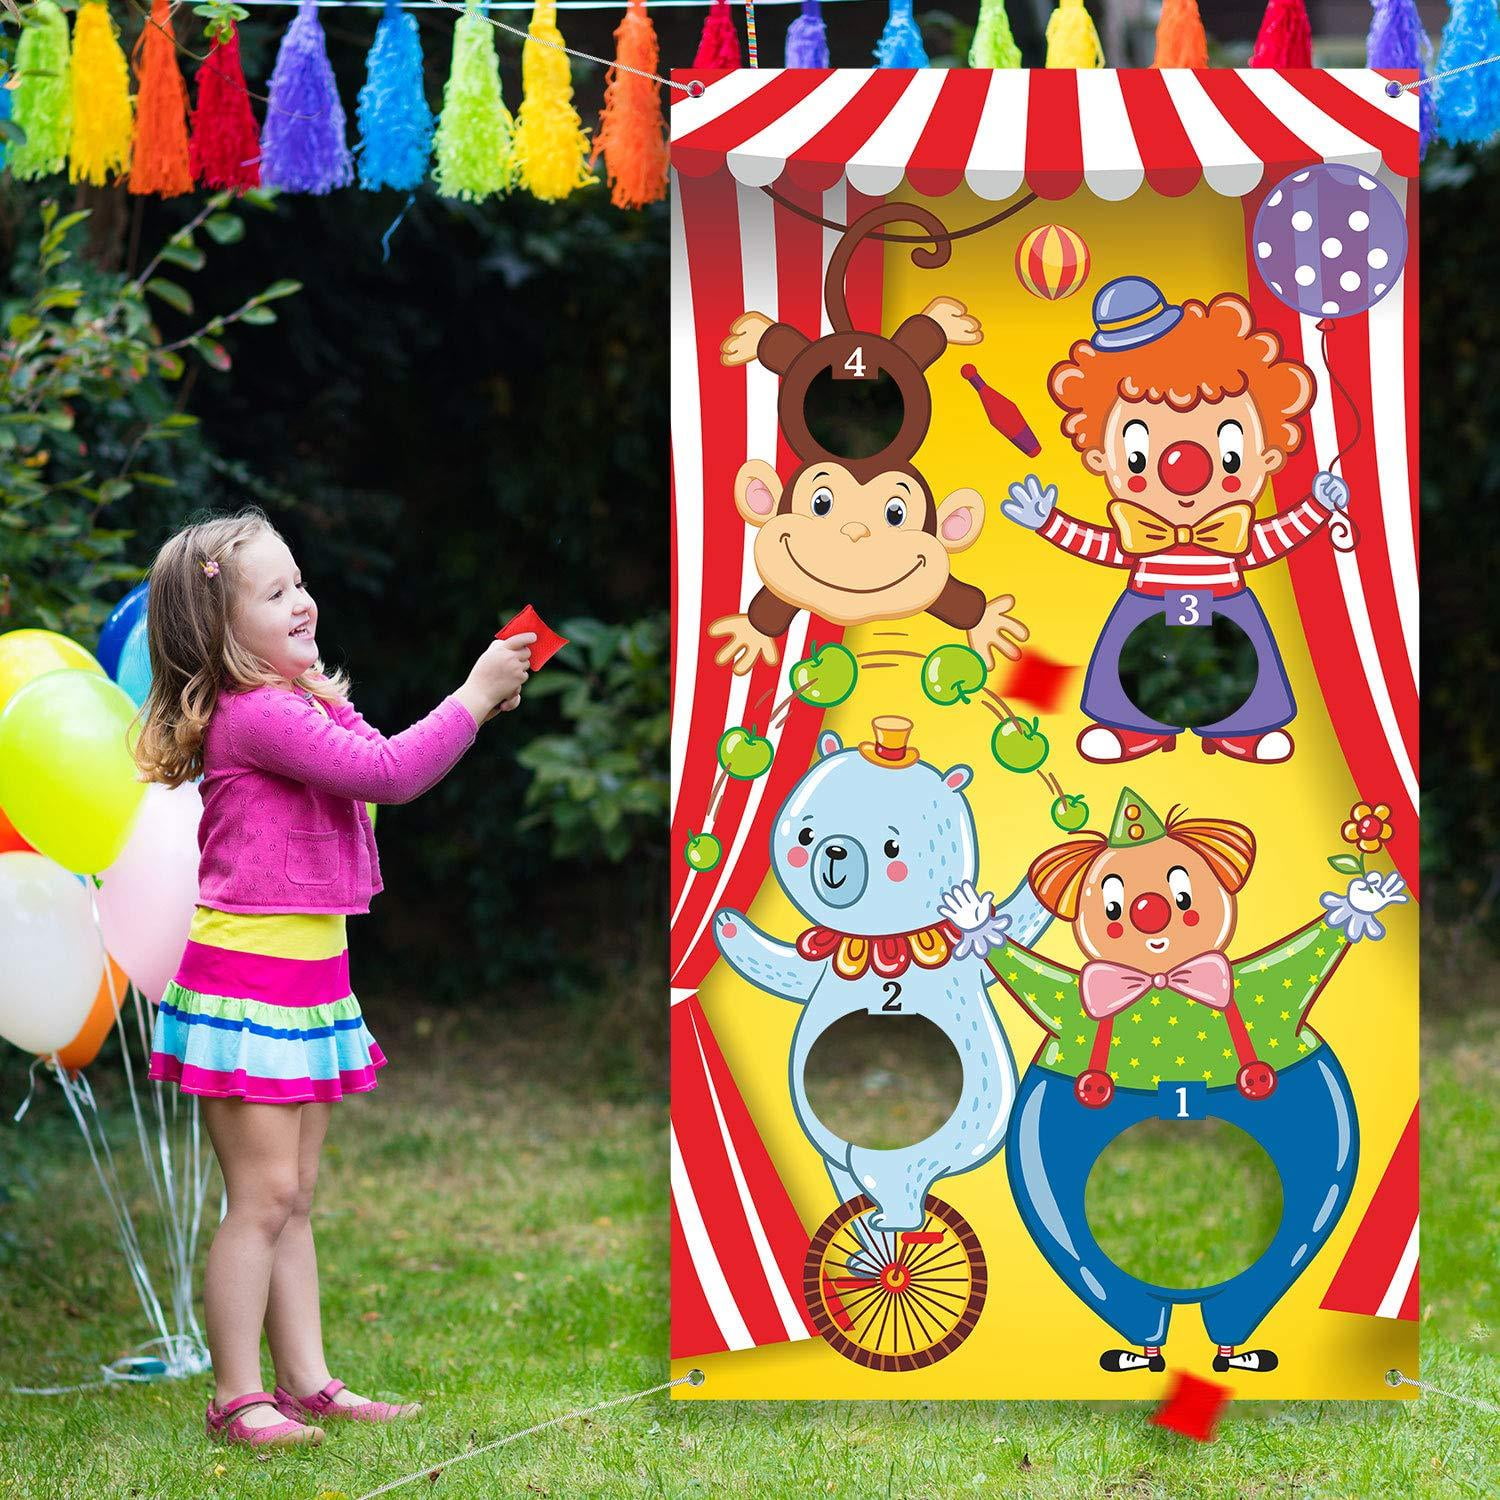 Indoor Outdoor Game Party Supplies for Kids in Family Games,Birthday Party,Carnival Games xigua Snow Compass Dolphins Toss Games Banner with 6 Bean Bags 